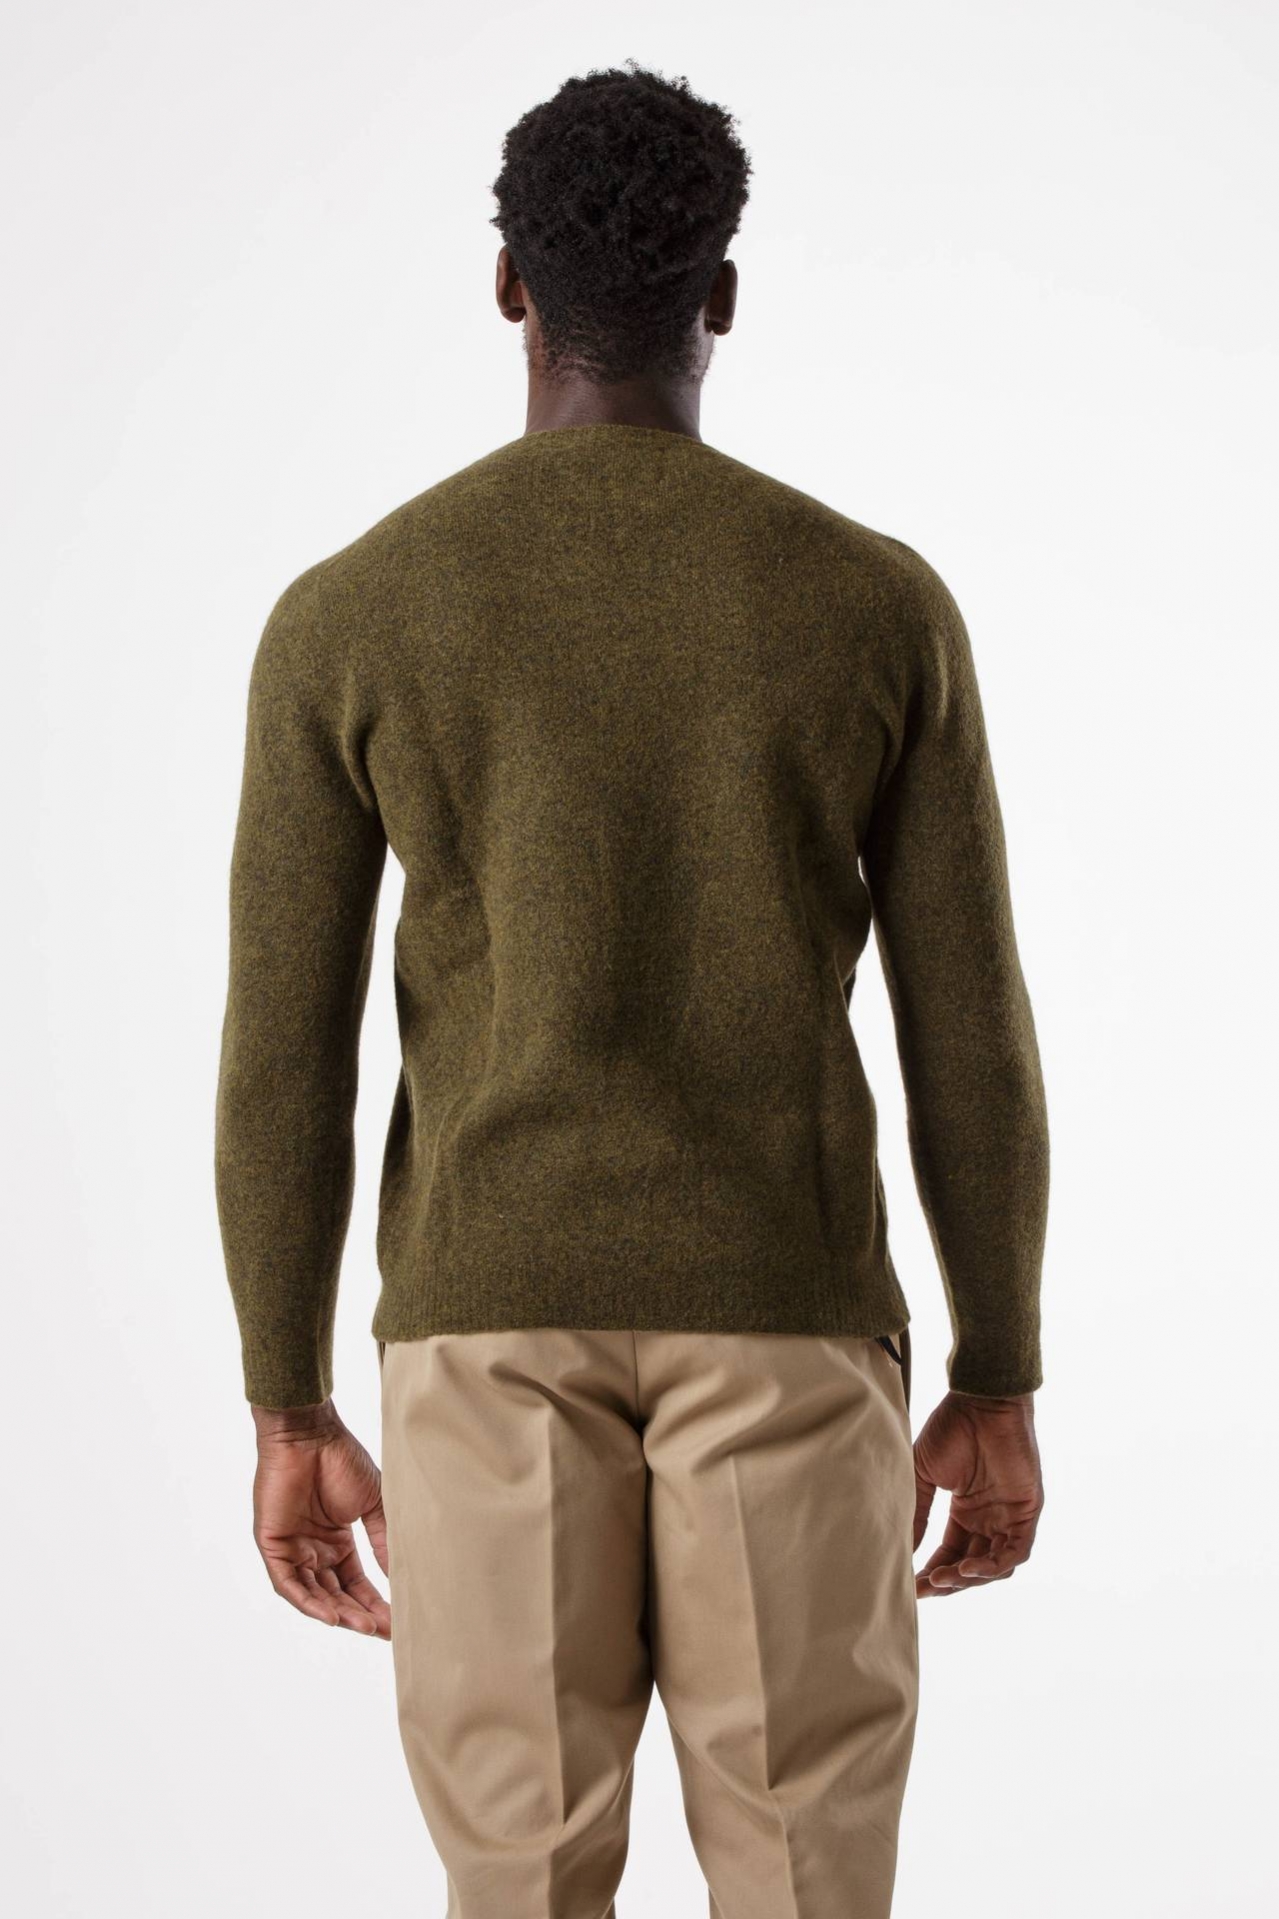 Wool and stretch nylon sweater